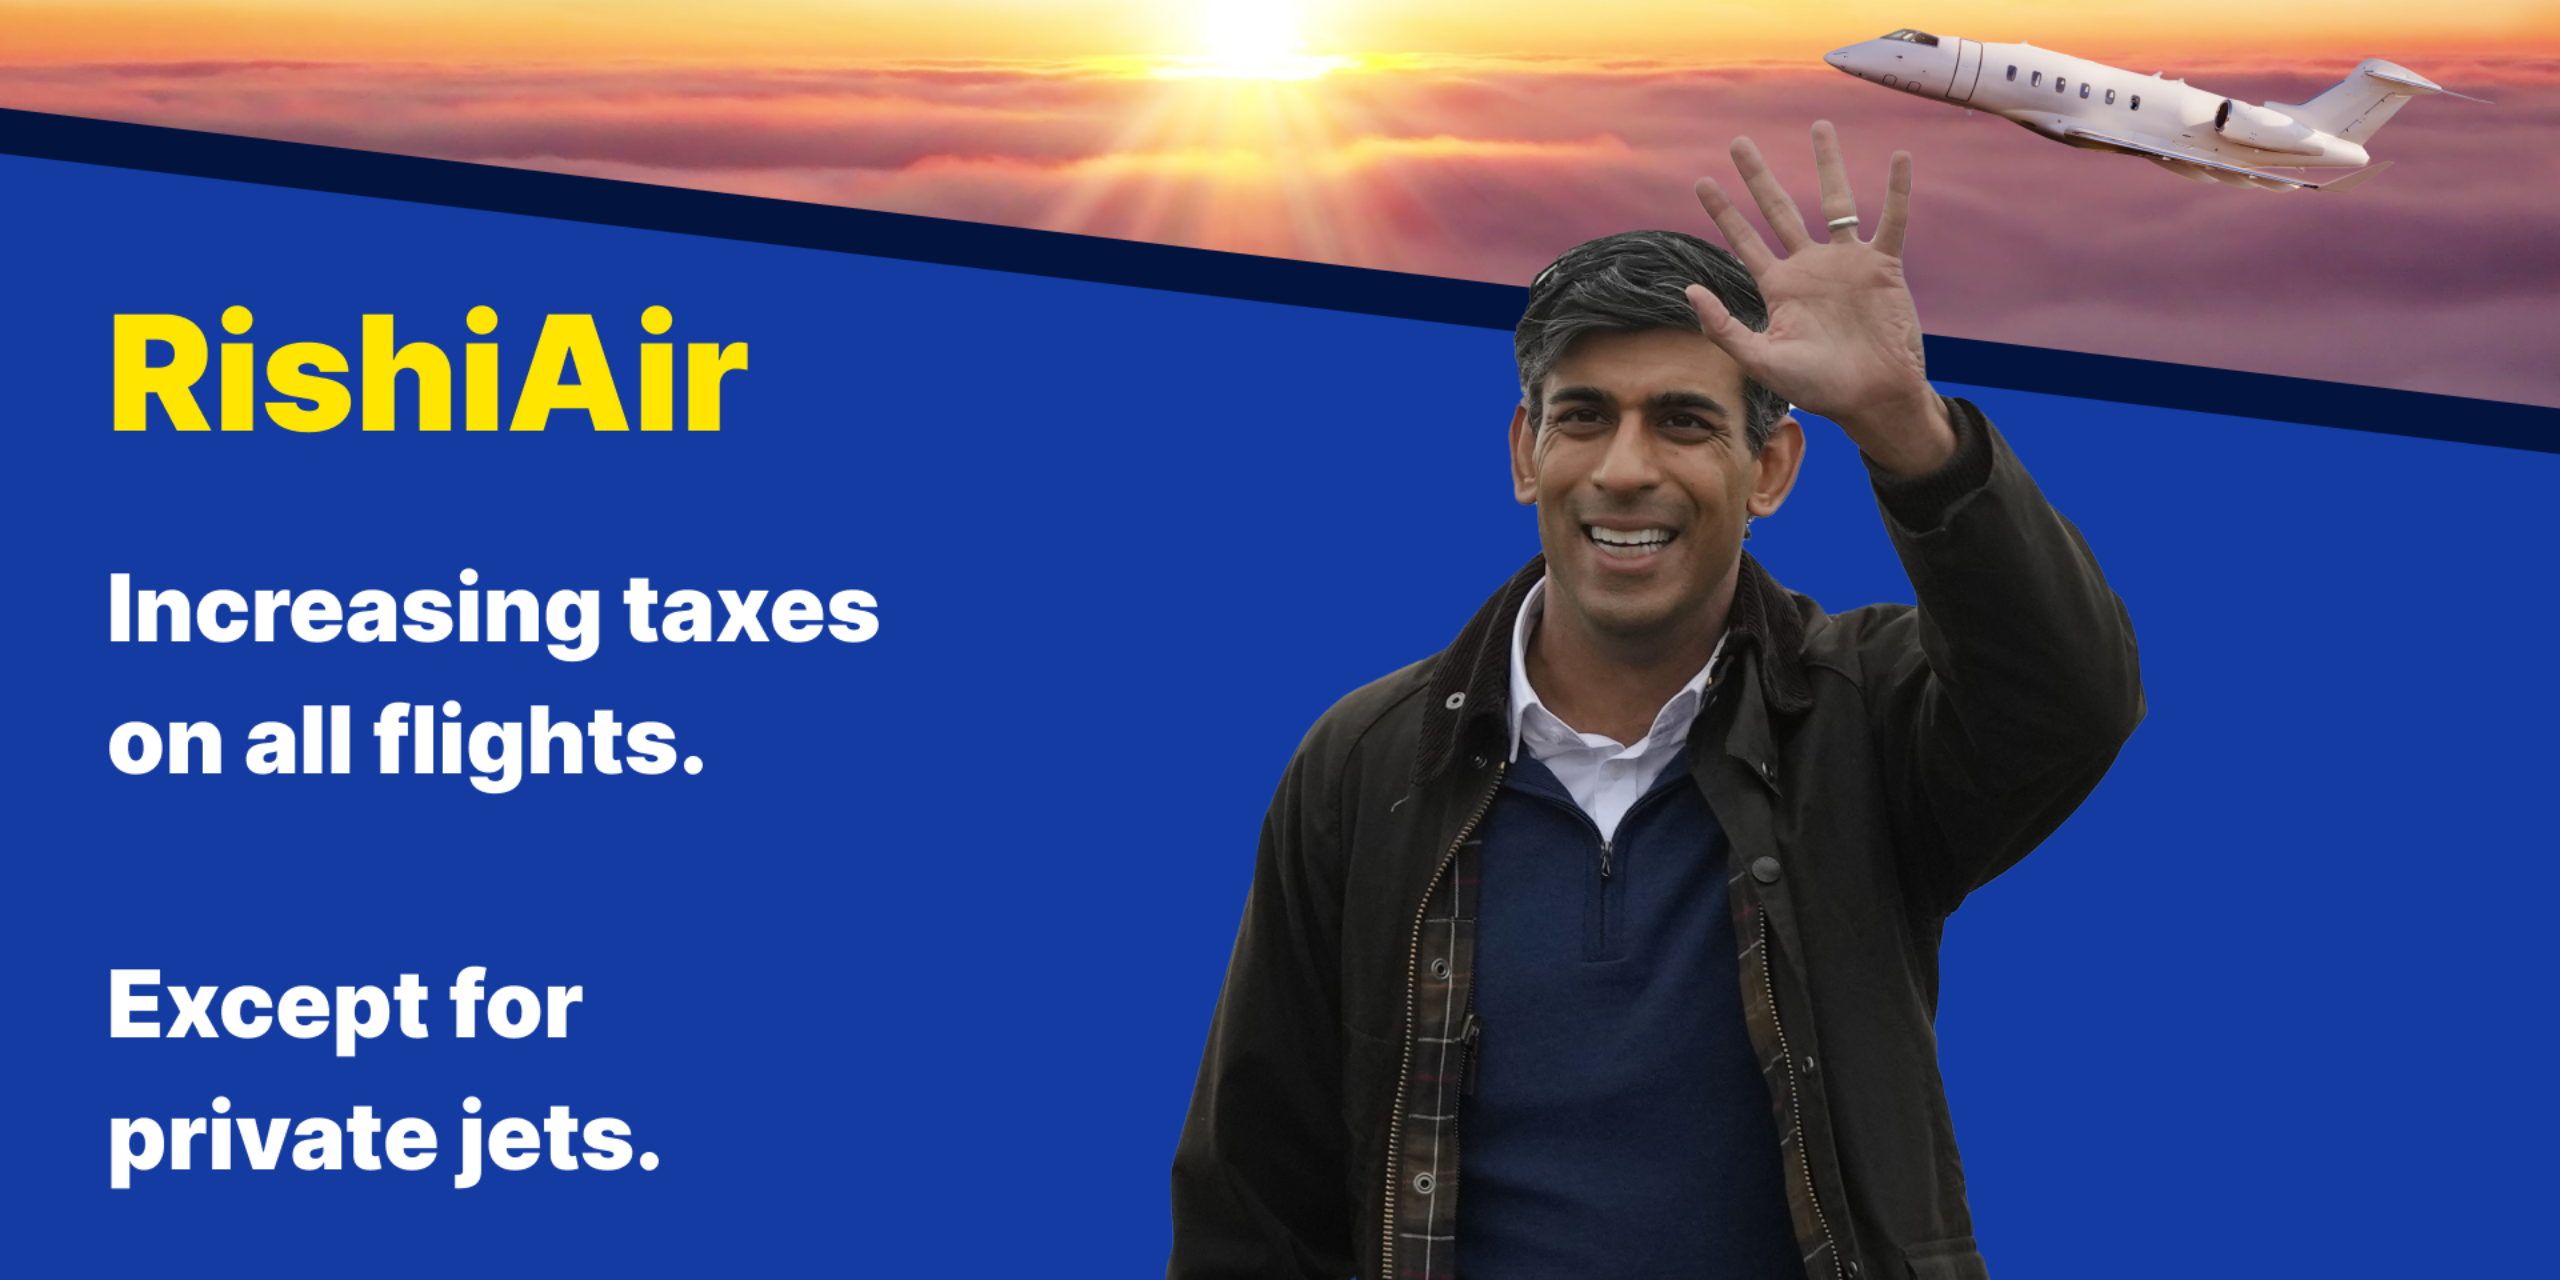 A mock advert for 'RishiAir' with photo of Rishi Sunak, blue background and photo of an aeroplane, with text reading: Increasing taxes on all flights. Except for private jets.